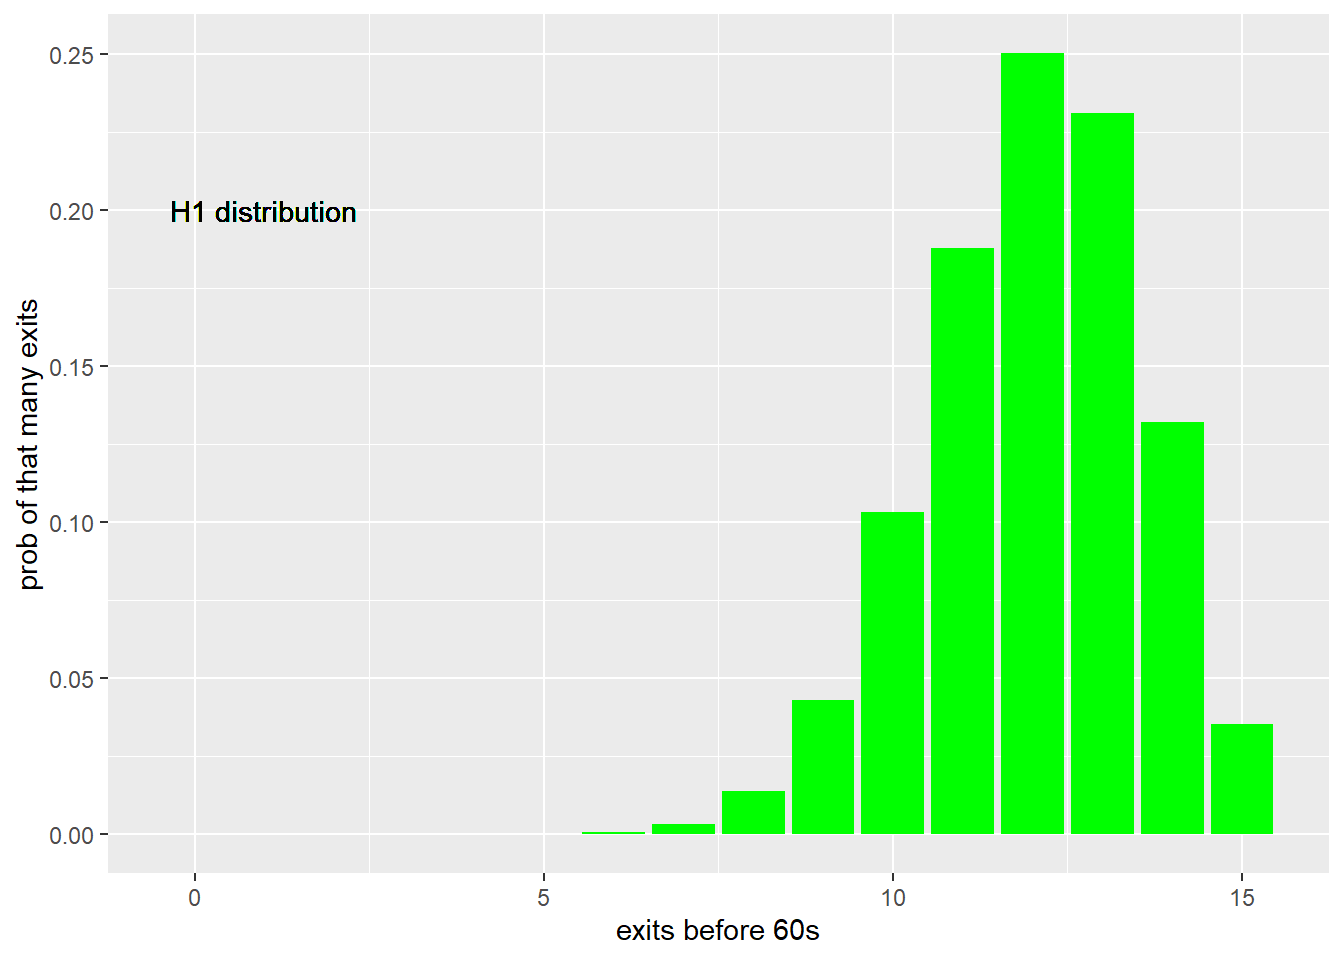 Distribution of chamber exits in a trial sized 15 for the alternate expectation that 80% would exit prior to 60 seconds, based upon the binomial.